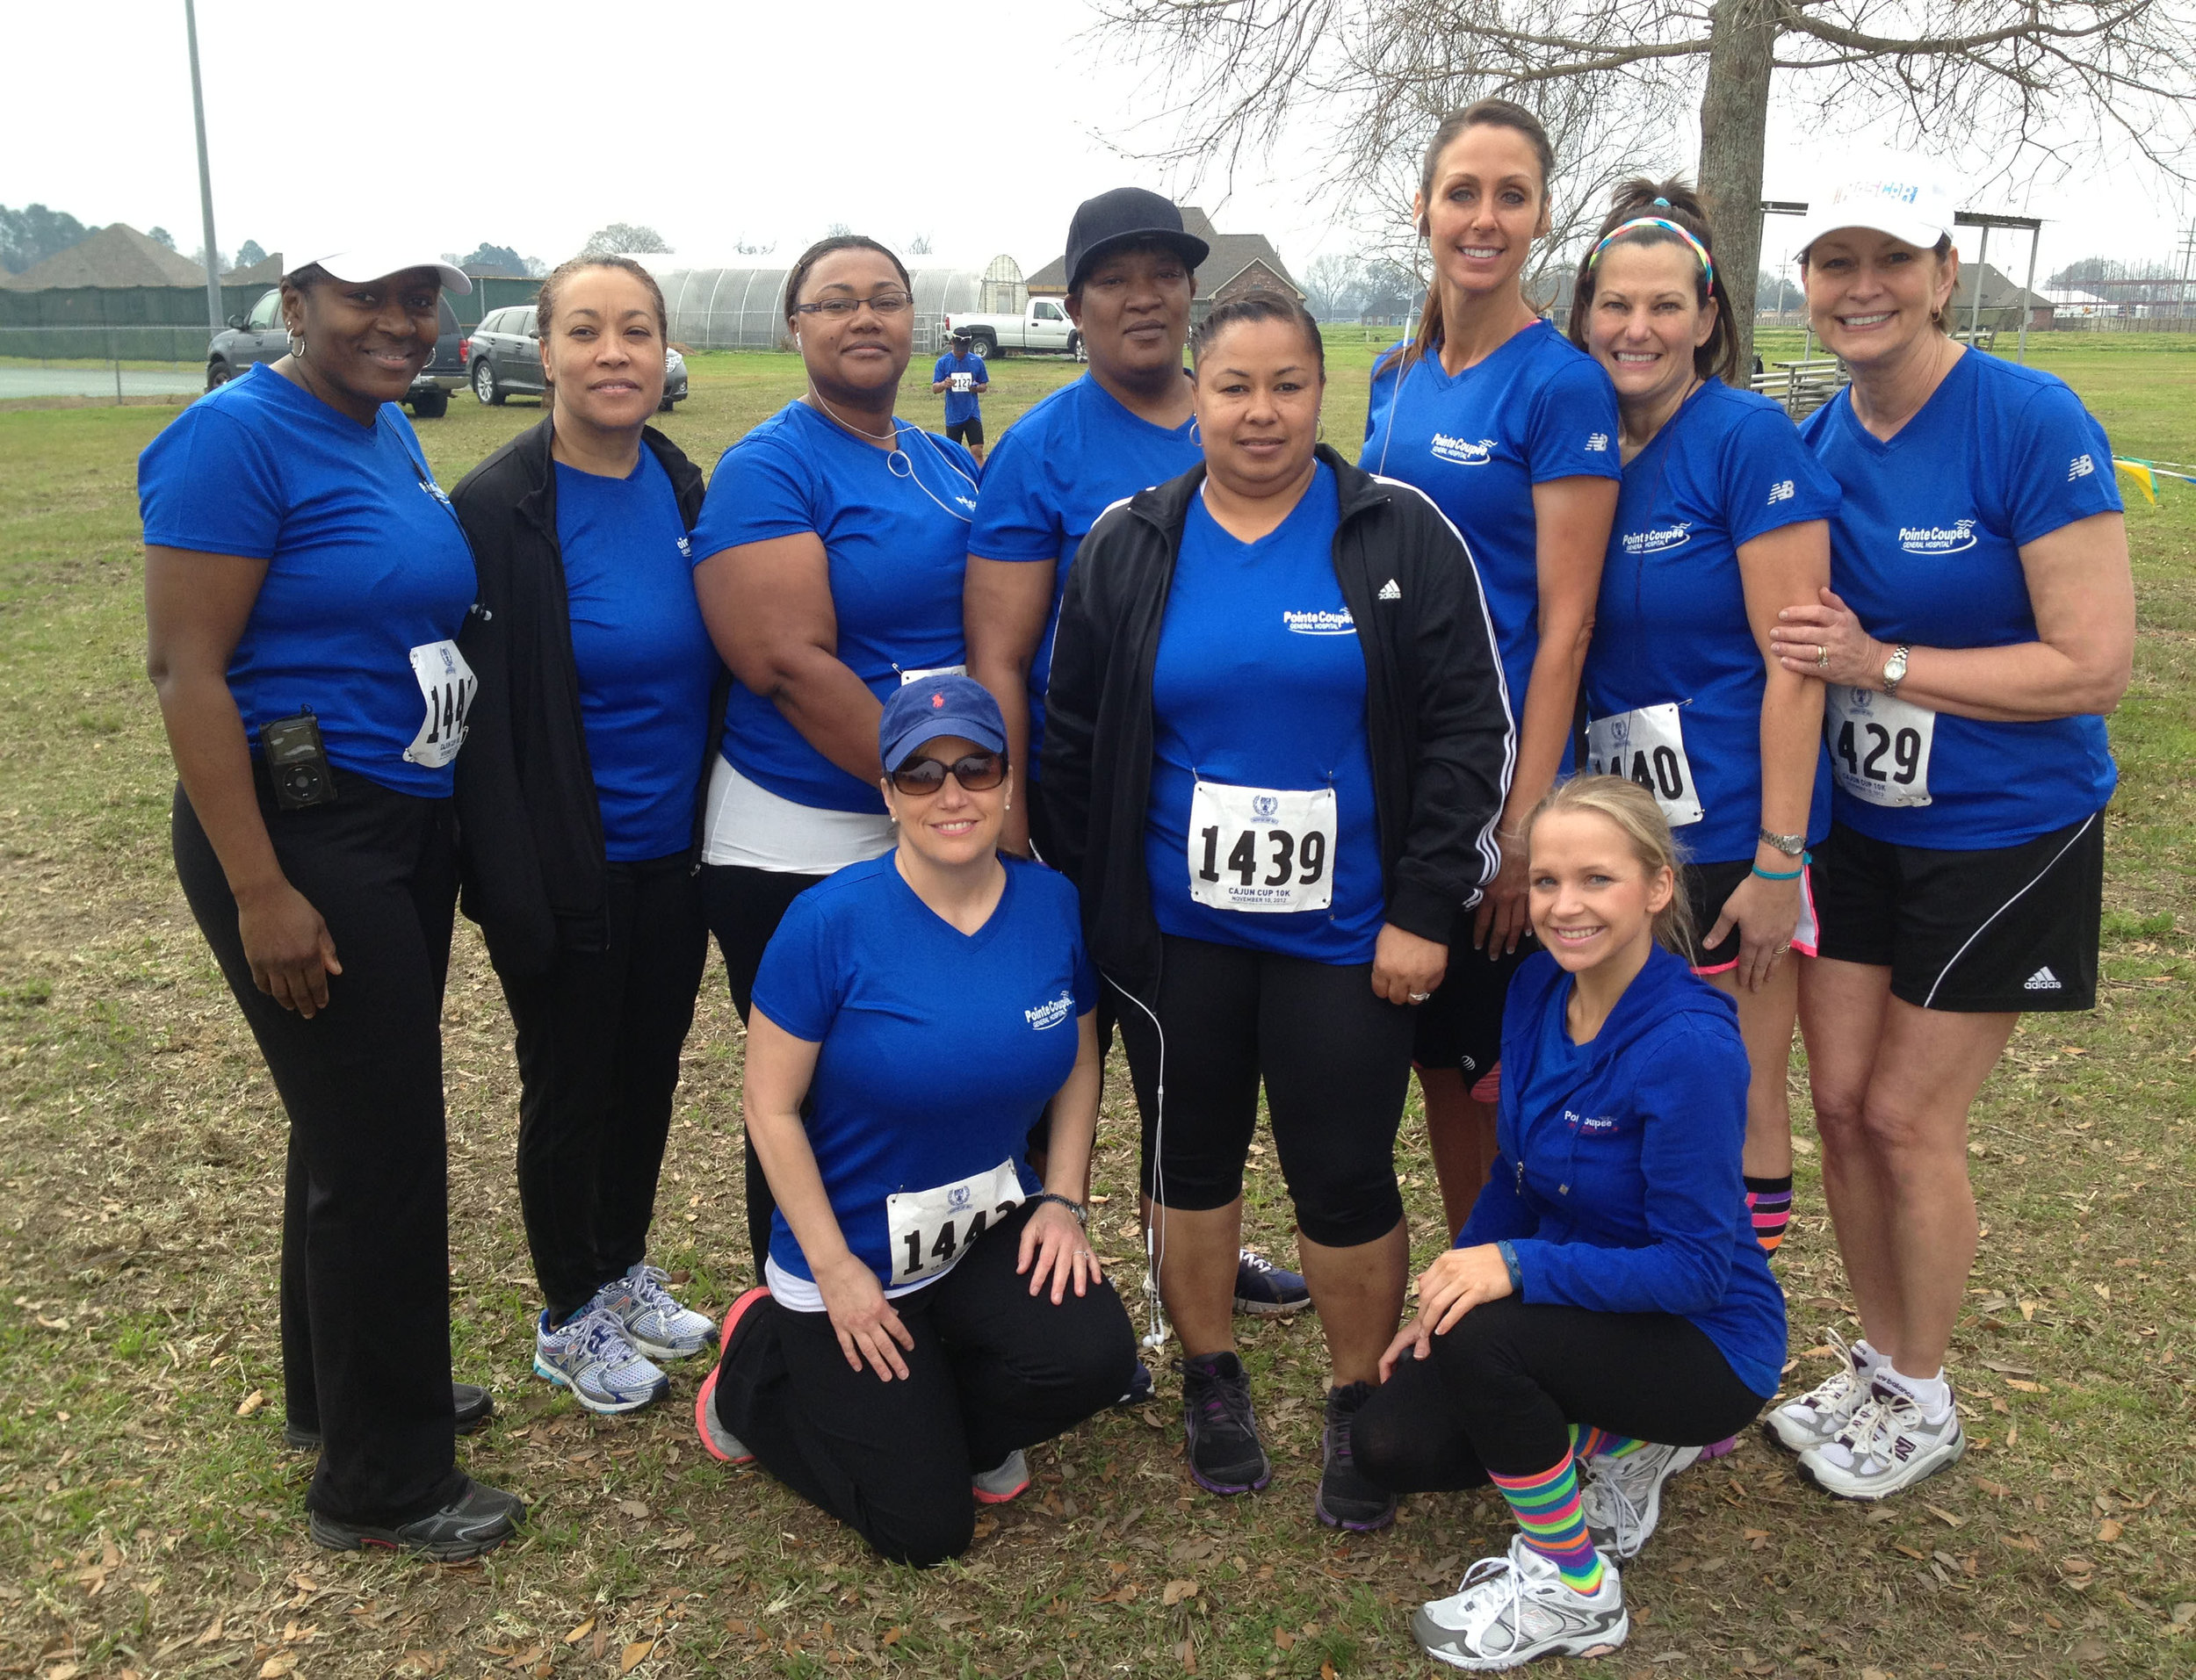  PCGH employees who participated in the 4 mile (6.4 km) Pecan Classic Run are pictured left to right: Standing: Wanda Demoulin, Dania Tolliver, Stephanie Chaney, Connie Joseph, Monette Barre, Roxane Jewell, Paula Guidroz, and Elaine Hurme. Kneeling: 